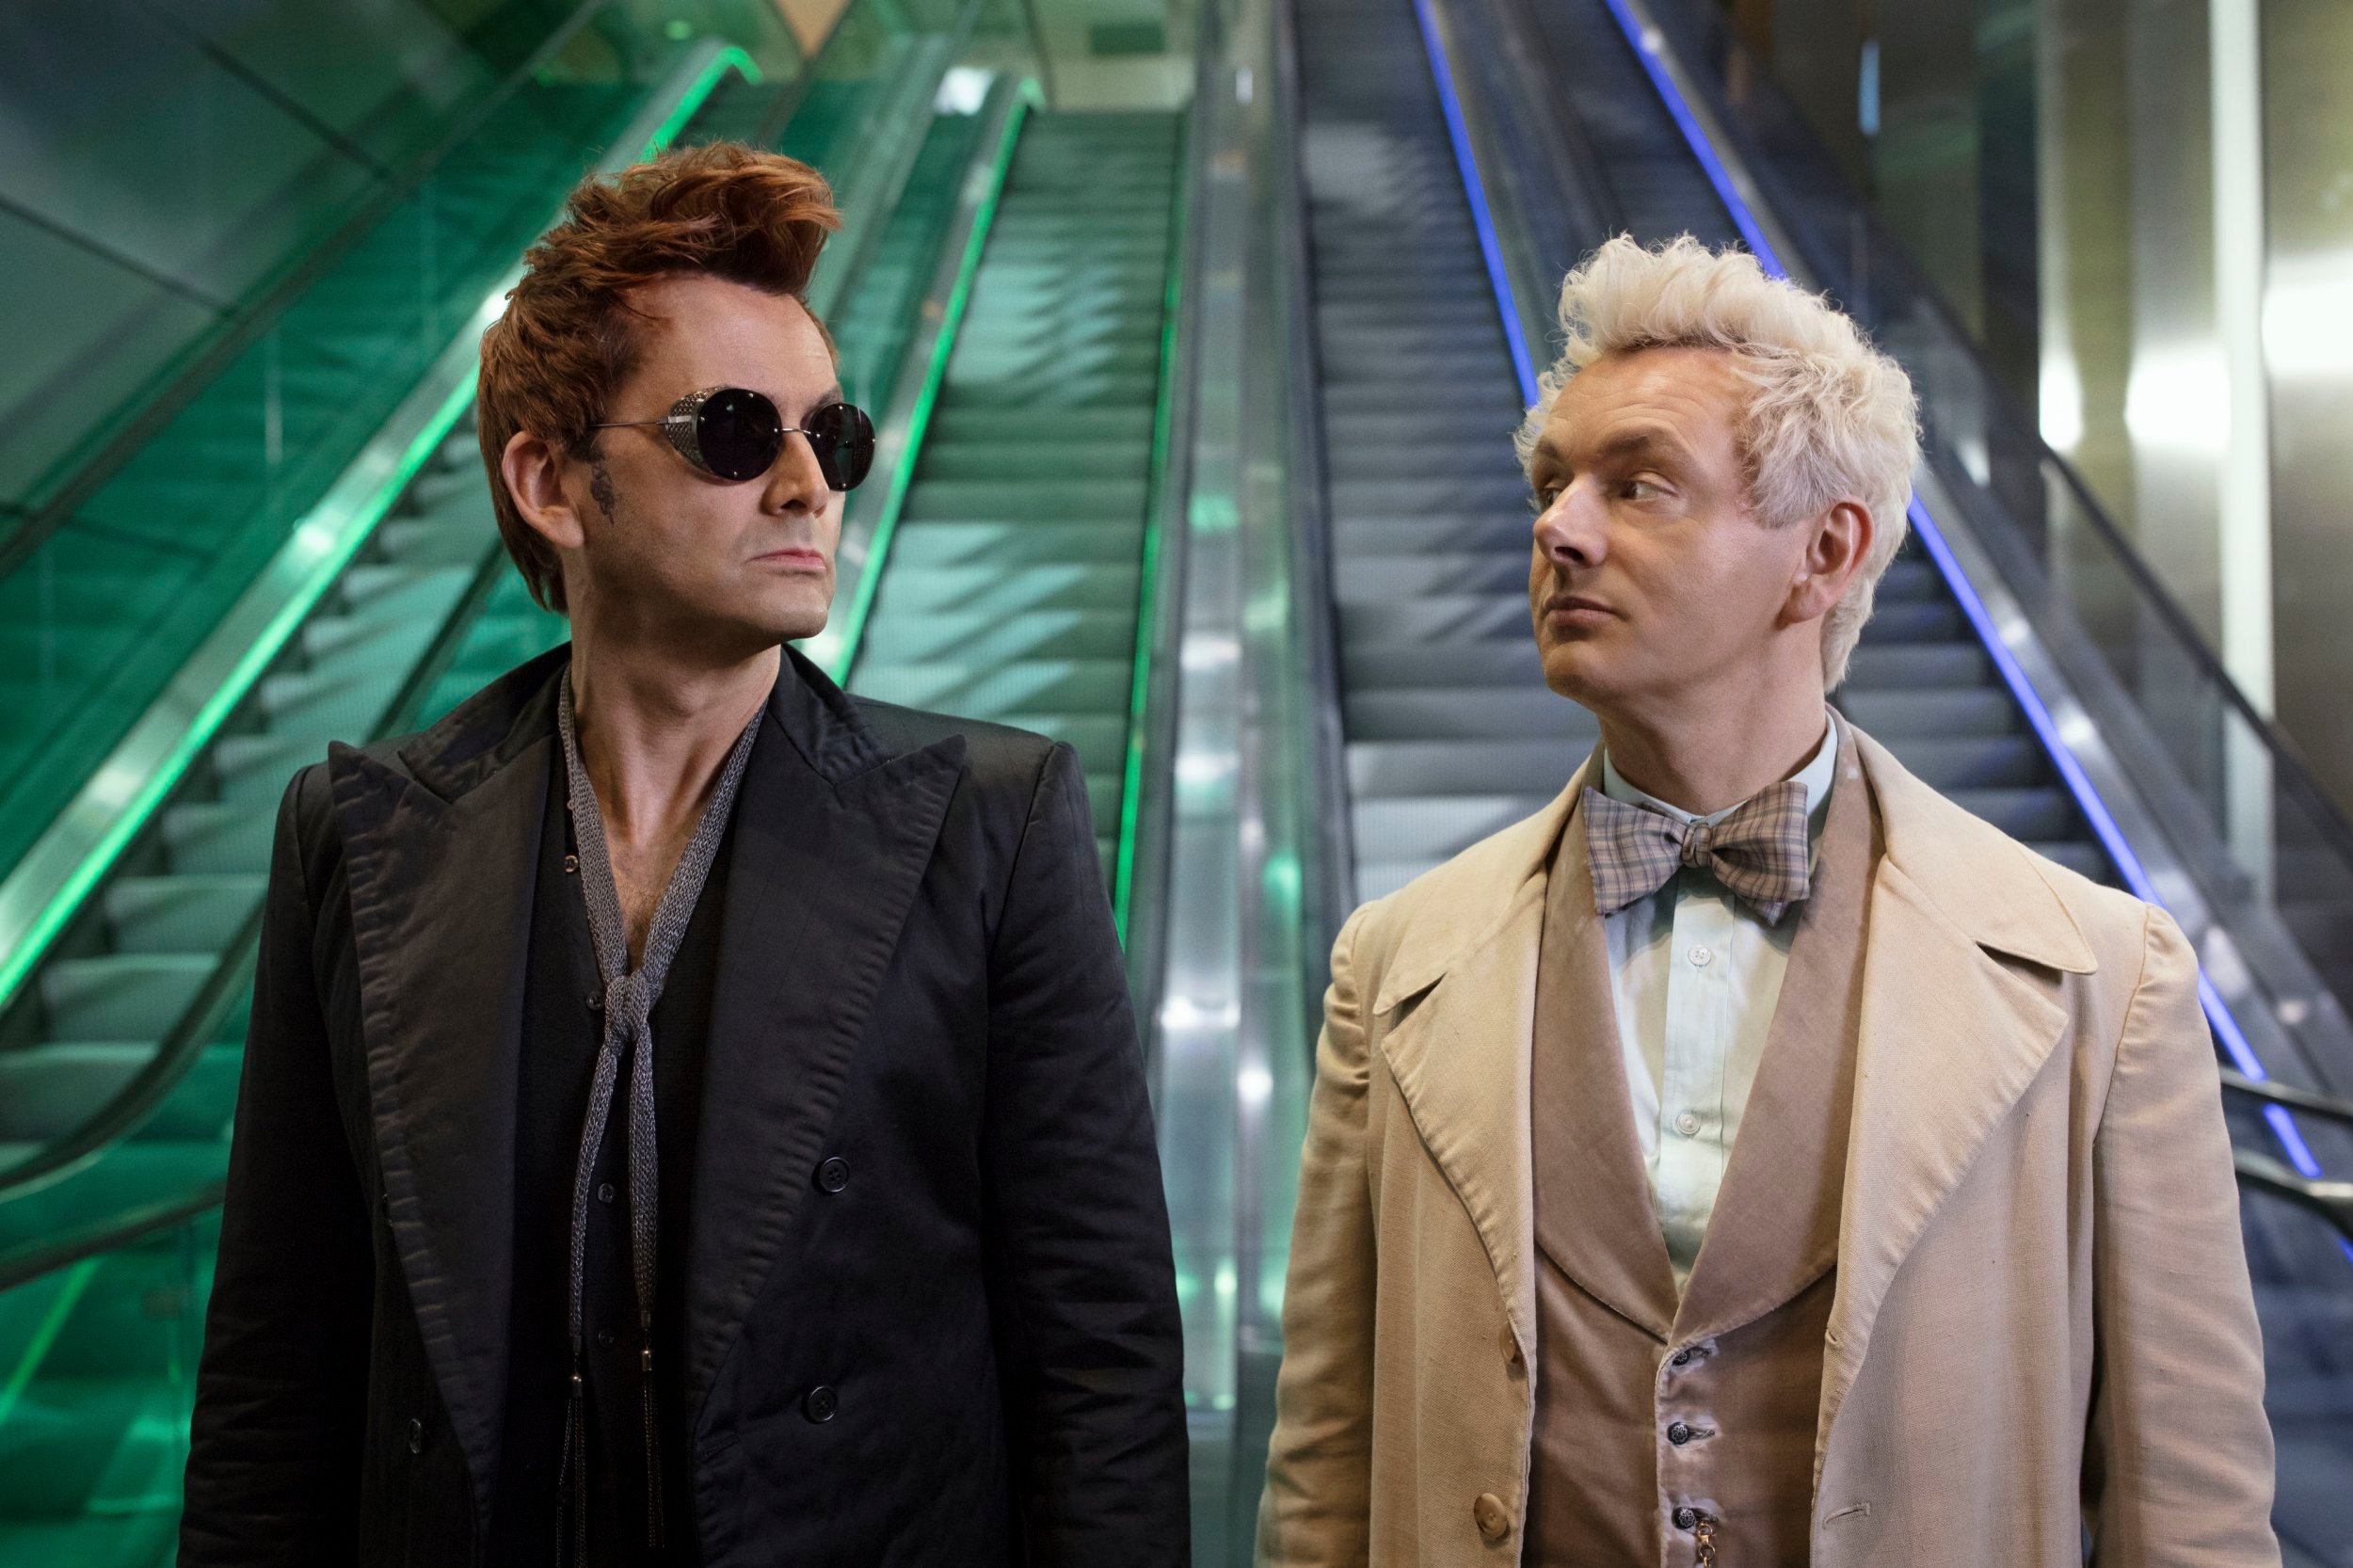 Crowley and Aziraphale Good Omens ending last episode